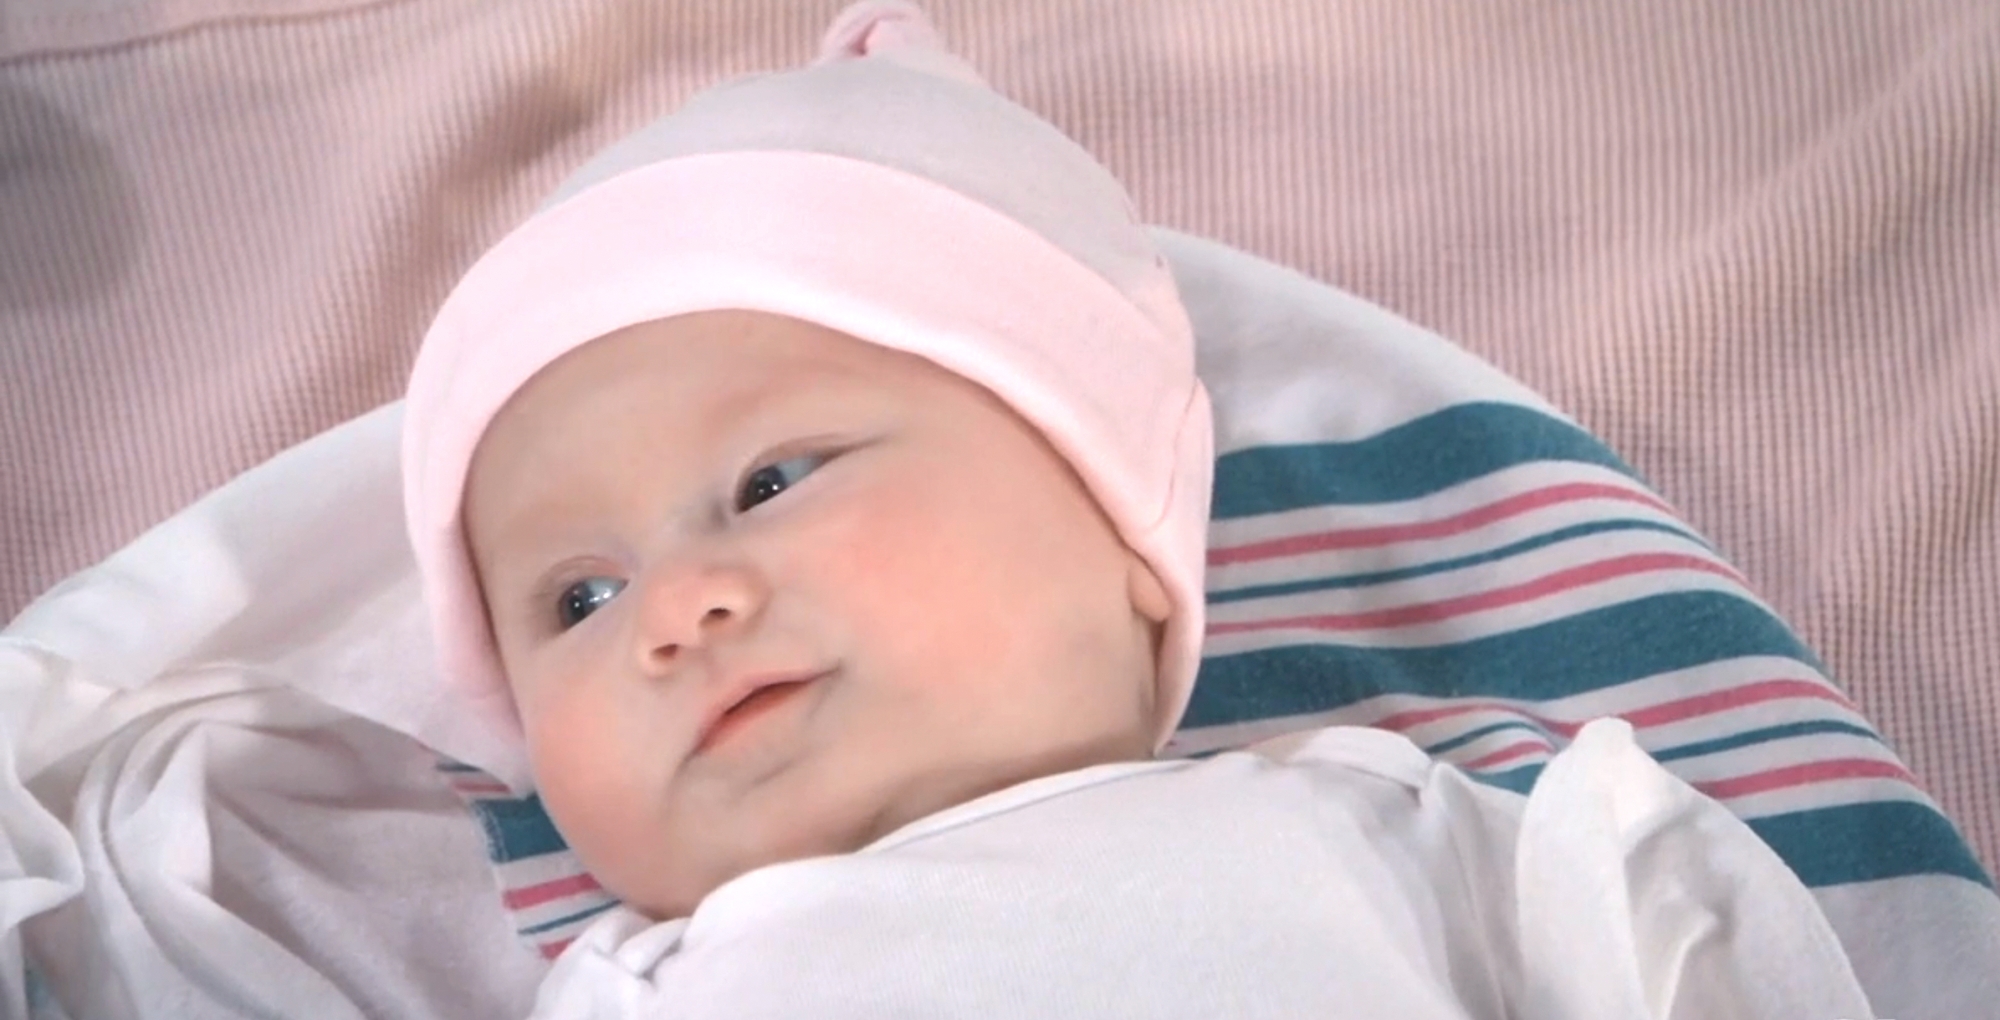 general hospital has a new baby on the scene and she's big